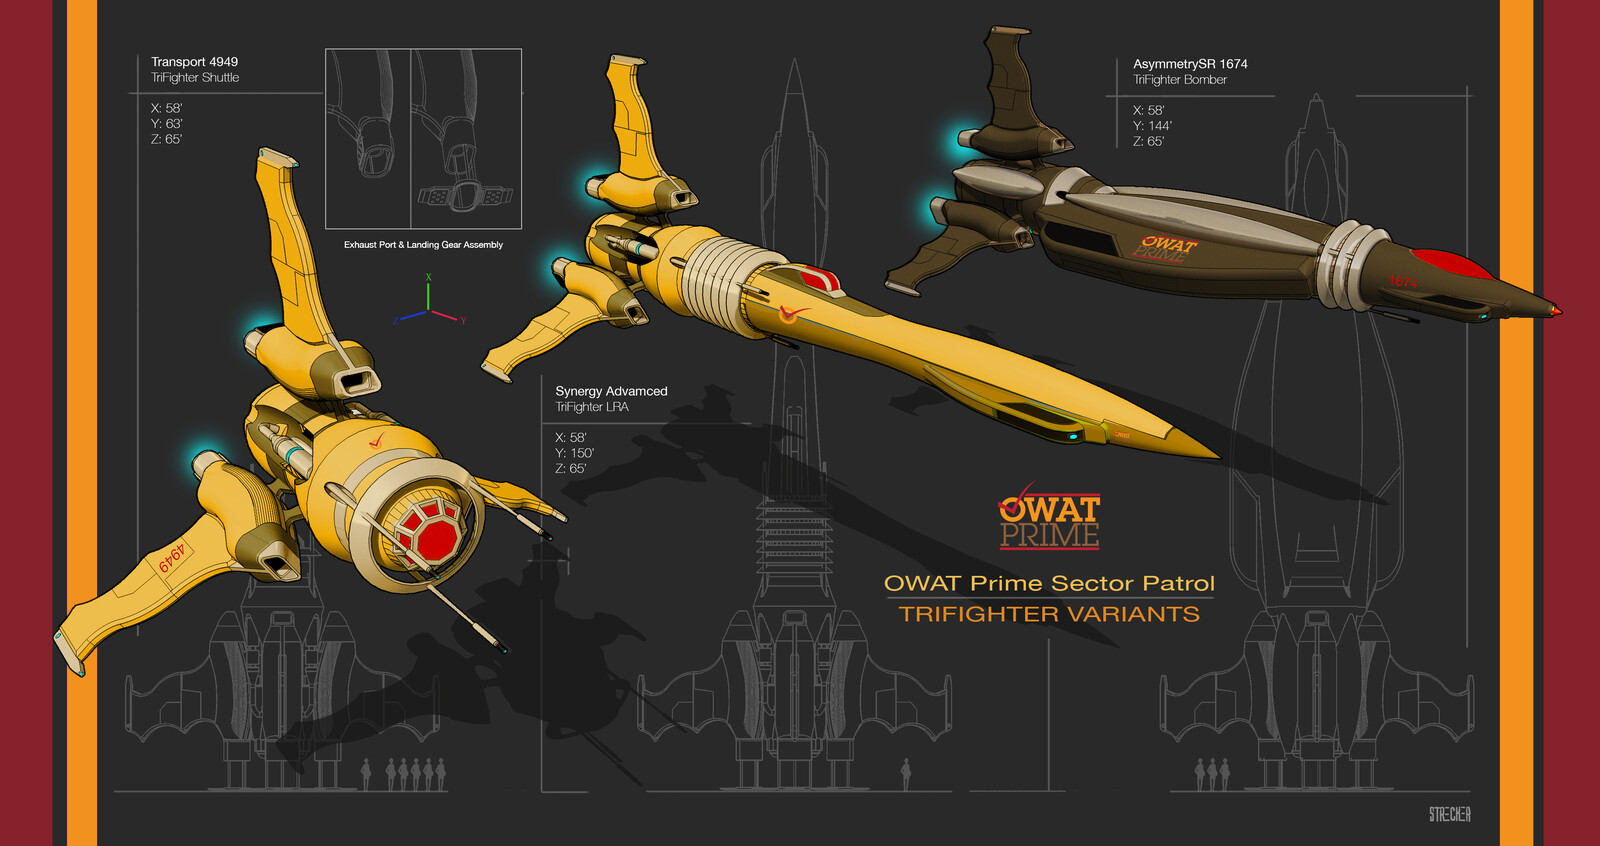 Modular multi-role space fighters from Owat Prime